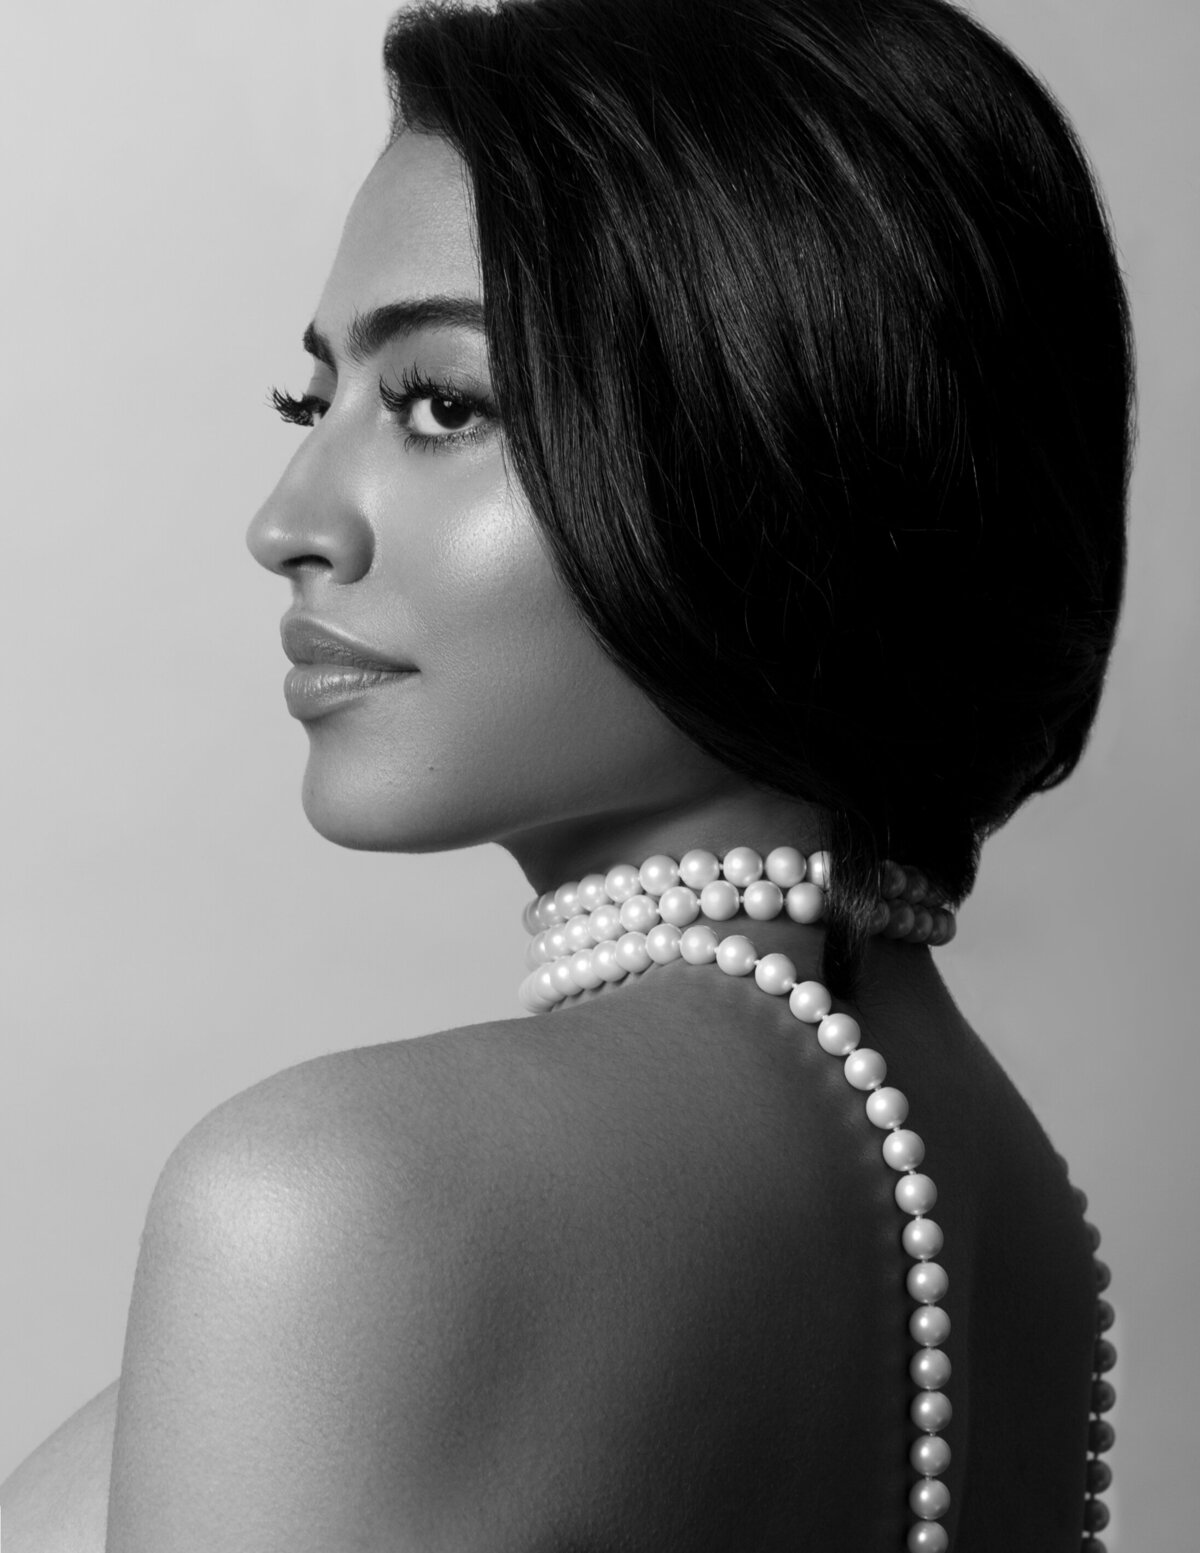 Stunning portrait in black and white of a woman wearing pearls